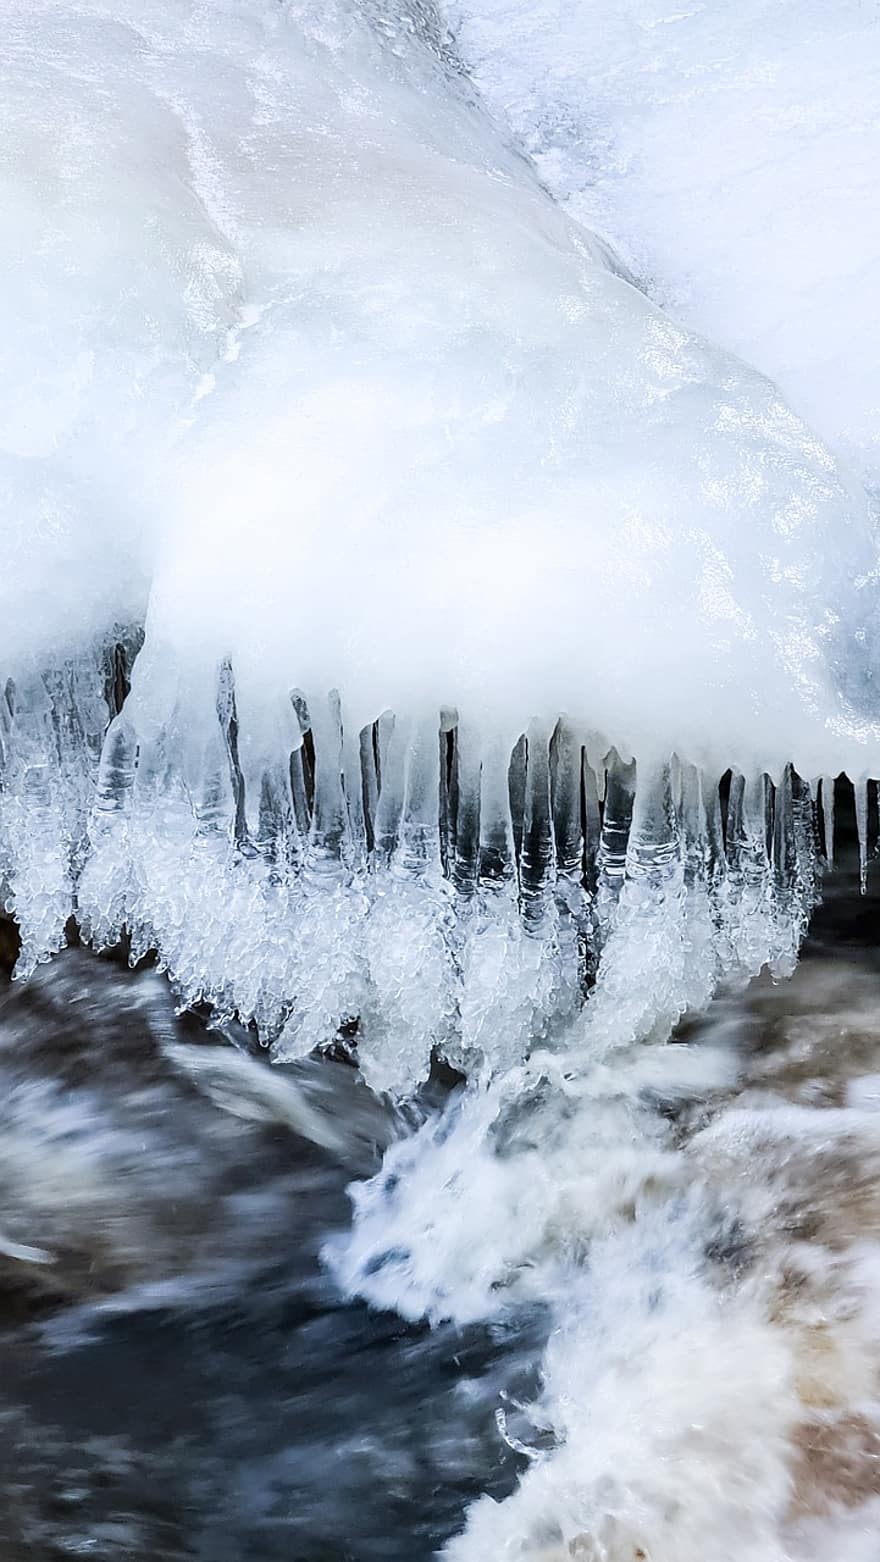 Ice, River, Icy, Winter, Water, Snow, Icicles, Cold, Rapids, wave, men